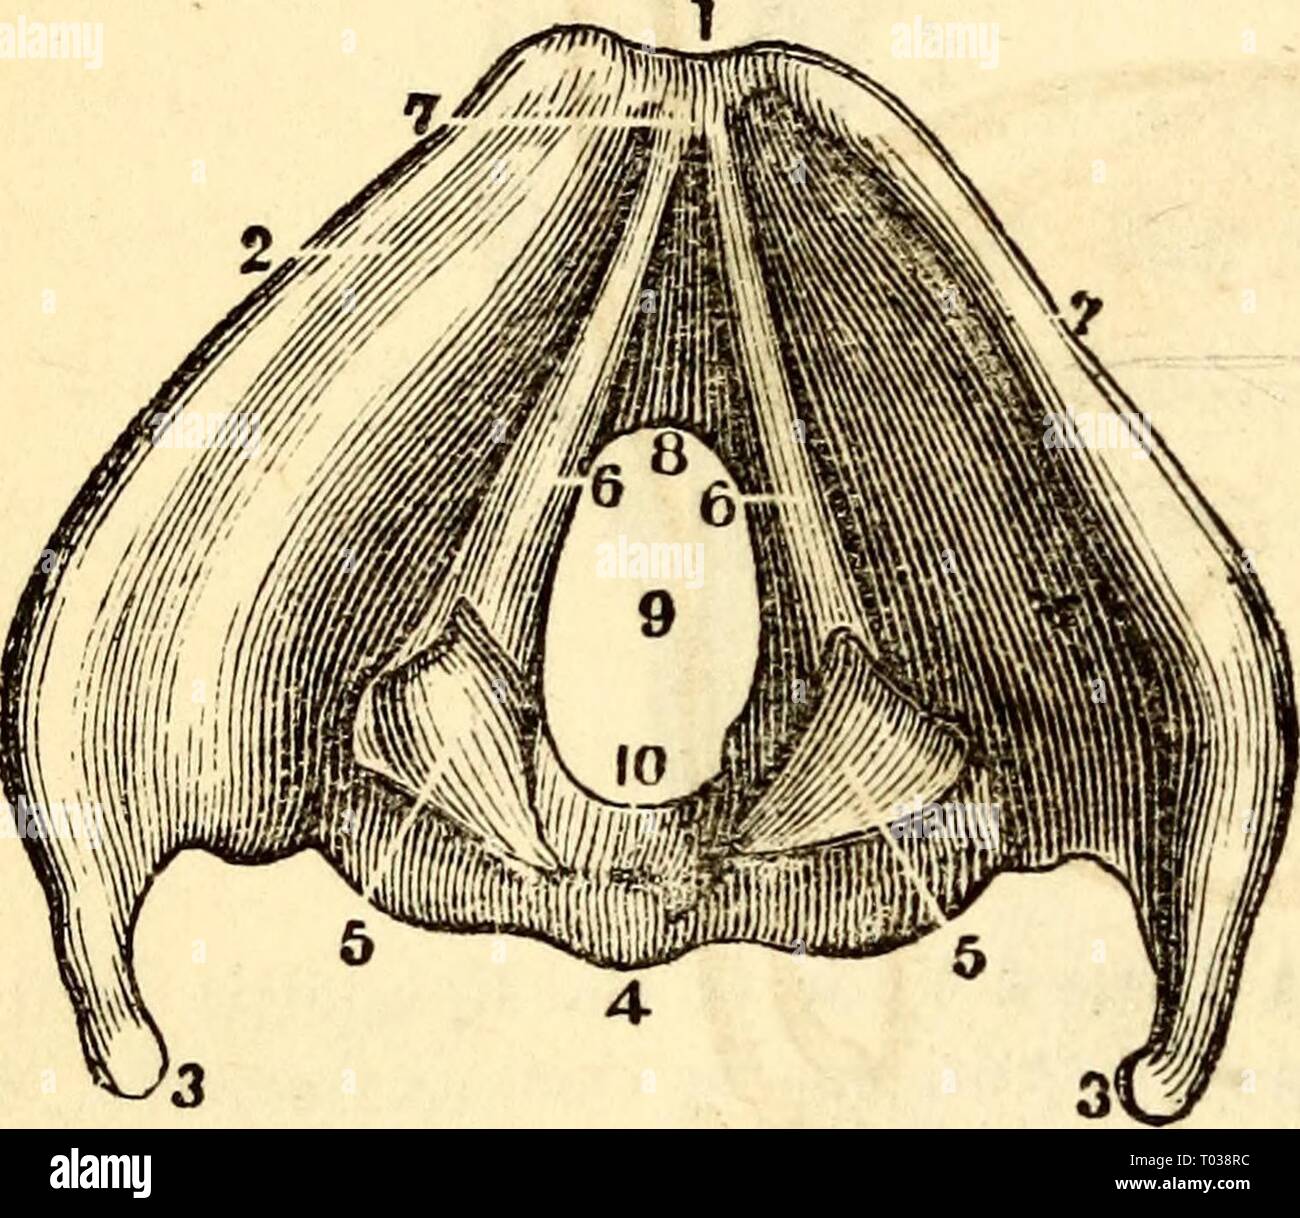 Elementary anatomy and physiology : for colleges, academies, and other schools . elementaryanato00hitc Year: 1869  2G2 HITCHCOCK'S ANATOMY frequently become considerably ossified in males in ad- vanced age. The Vocal Cords or ligaments are folds of white fibrous tis- sue, covered by mucous membrane, and are made to vibrate when the air is forced over them. Hence ulceration, or any Fig. 261. Fig. 262.    A View of the Larynx from above, showing the Thyreo-Arytenoi J or Vocal Ligaments. 1, Superior Edcre of the La- rynx. 2, Its Anterior Face. 3, Cornua Majorcs of the Thyroid Cartilage. 4, Pos- t Stock Photo